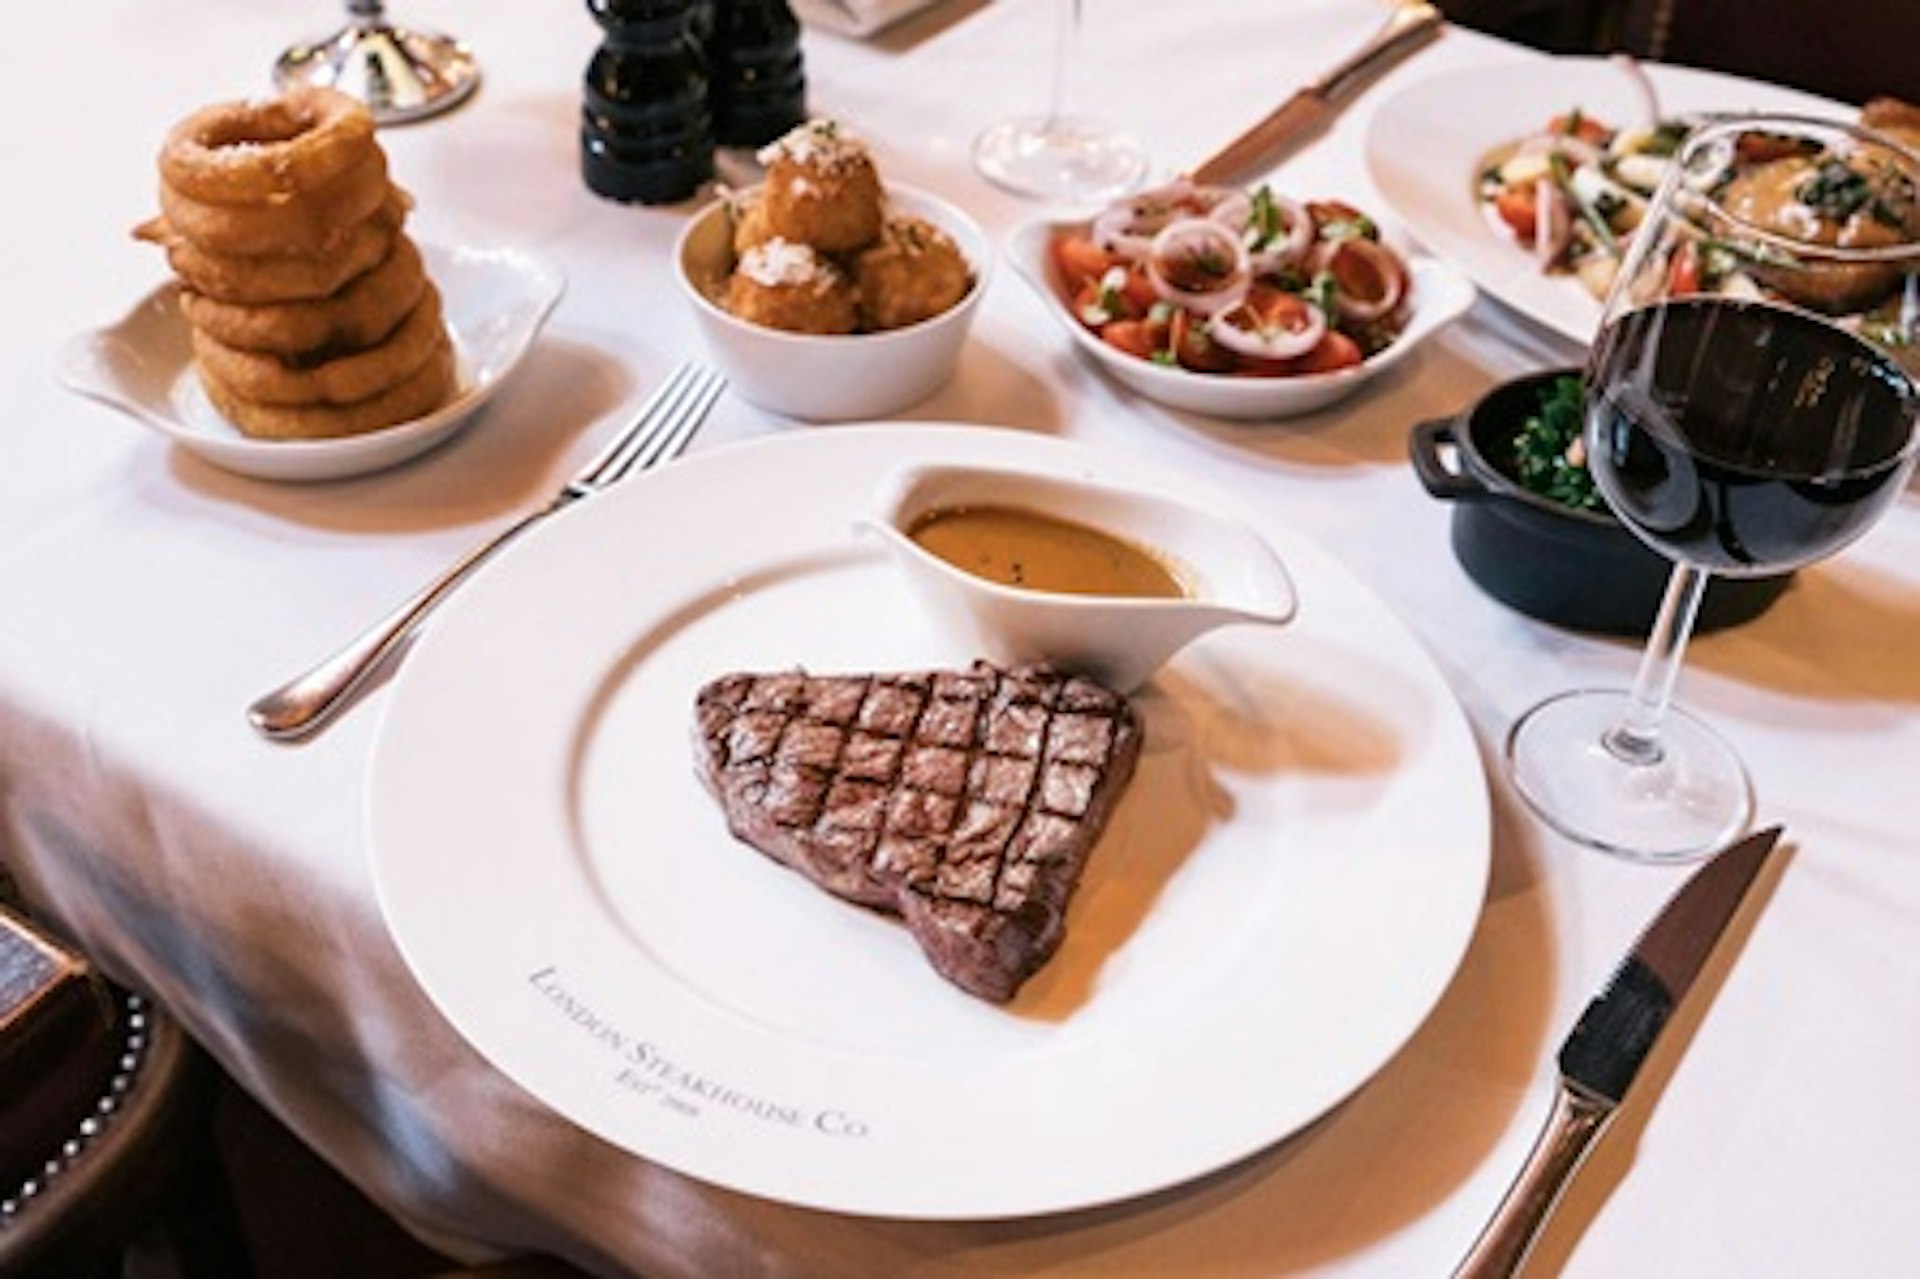 Two Course Dining Experience and Cocktail for Two at Marco Pierre White's London Steakhouse Co 1